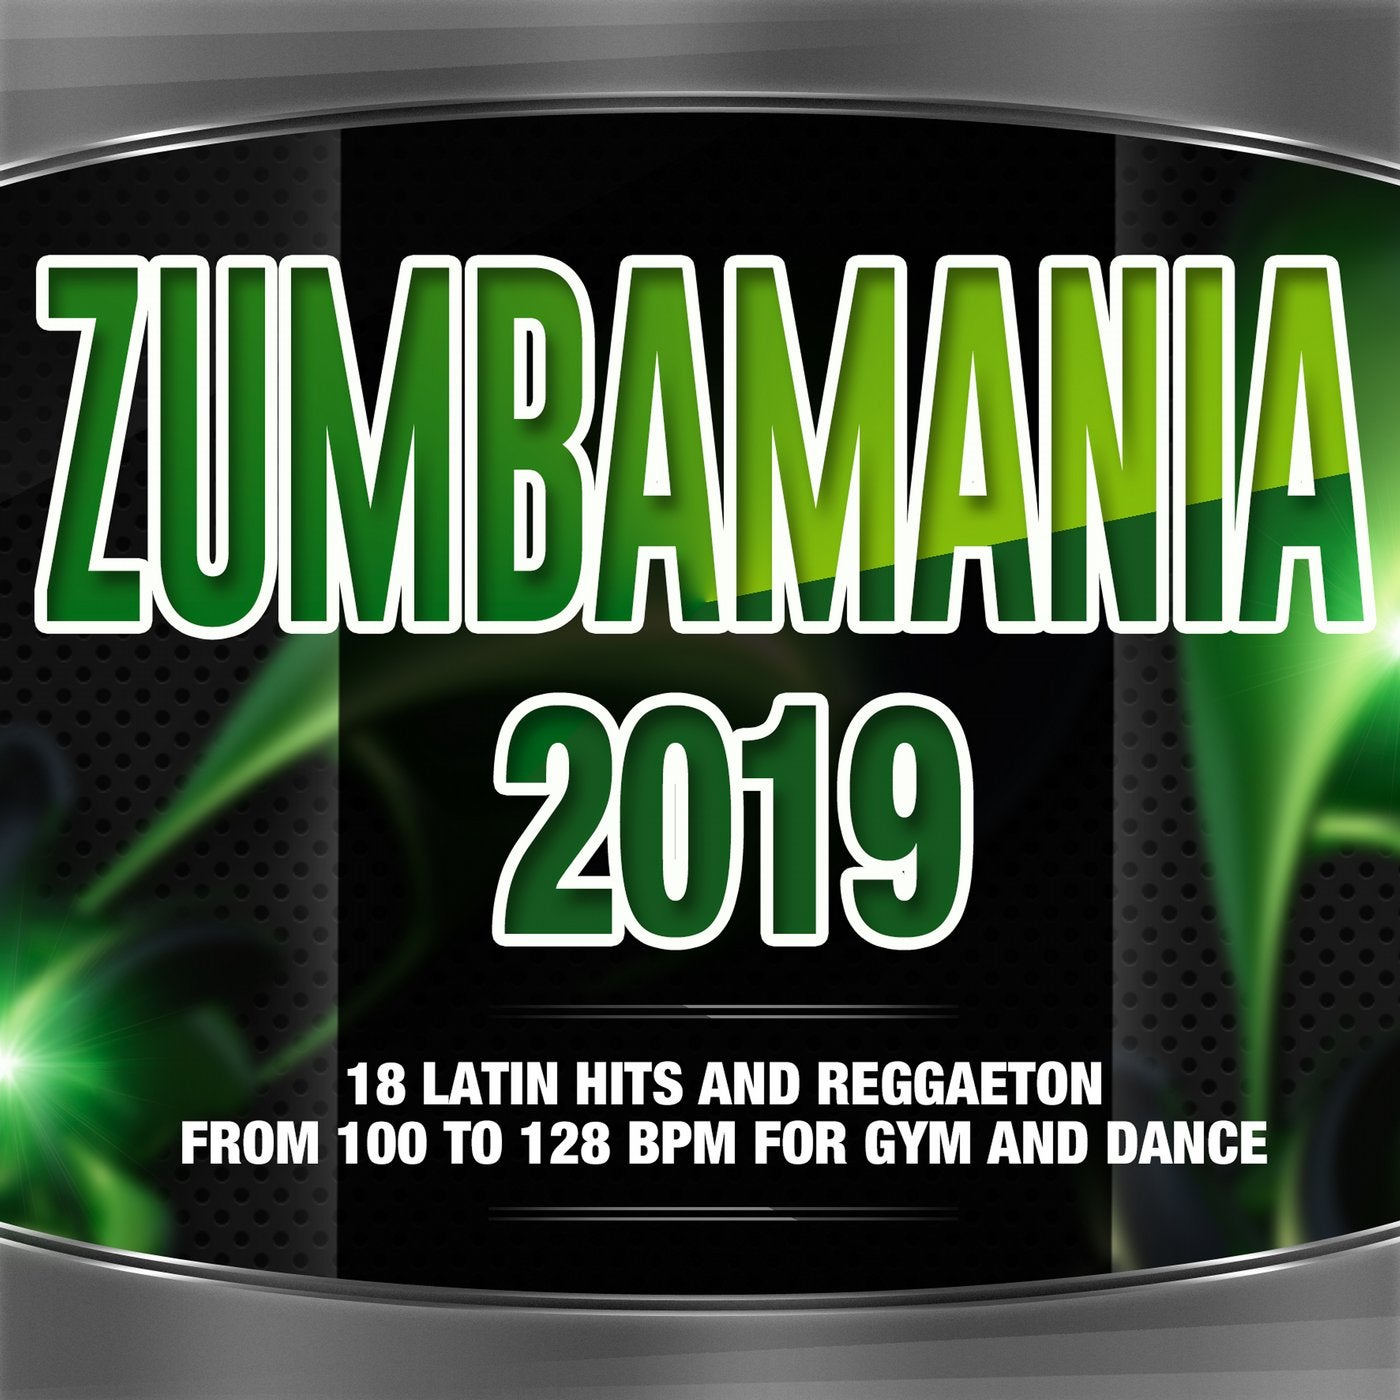 Zumbamania 2019 - Latin Hits And Reggaeton From 100 To 128 BPM For Gym And Dance